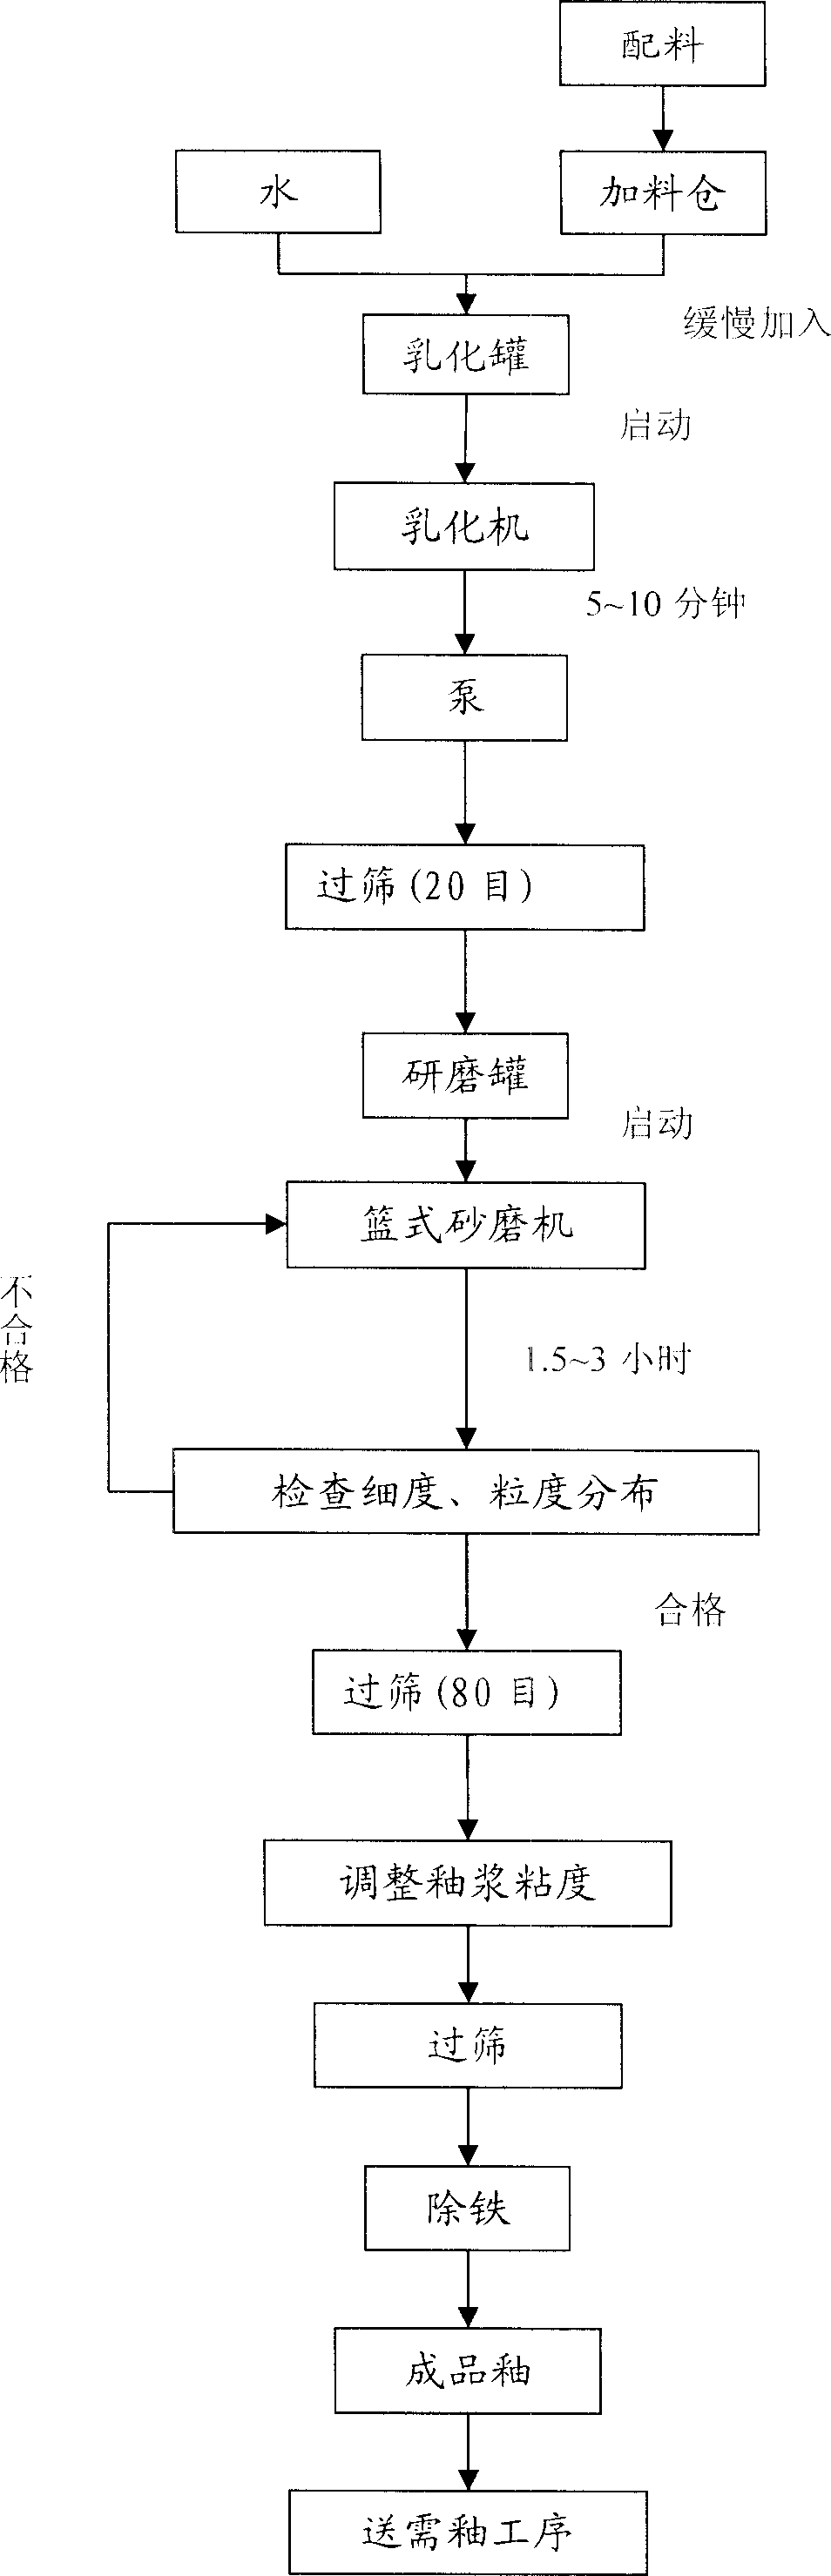 Process for preparing glaze for electric porcelain using basket type sand mill as main body